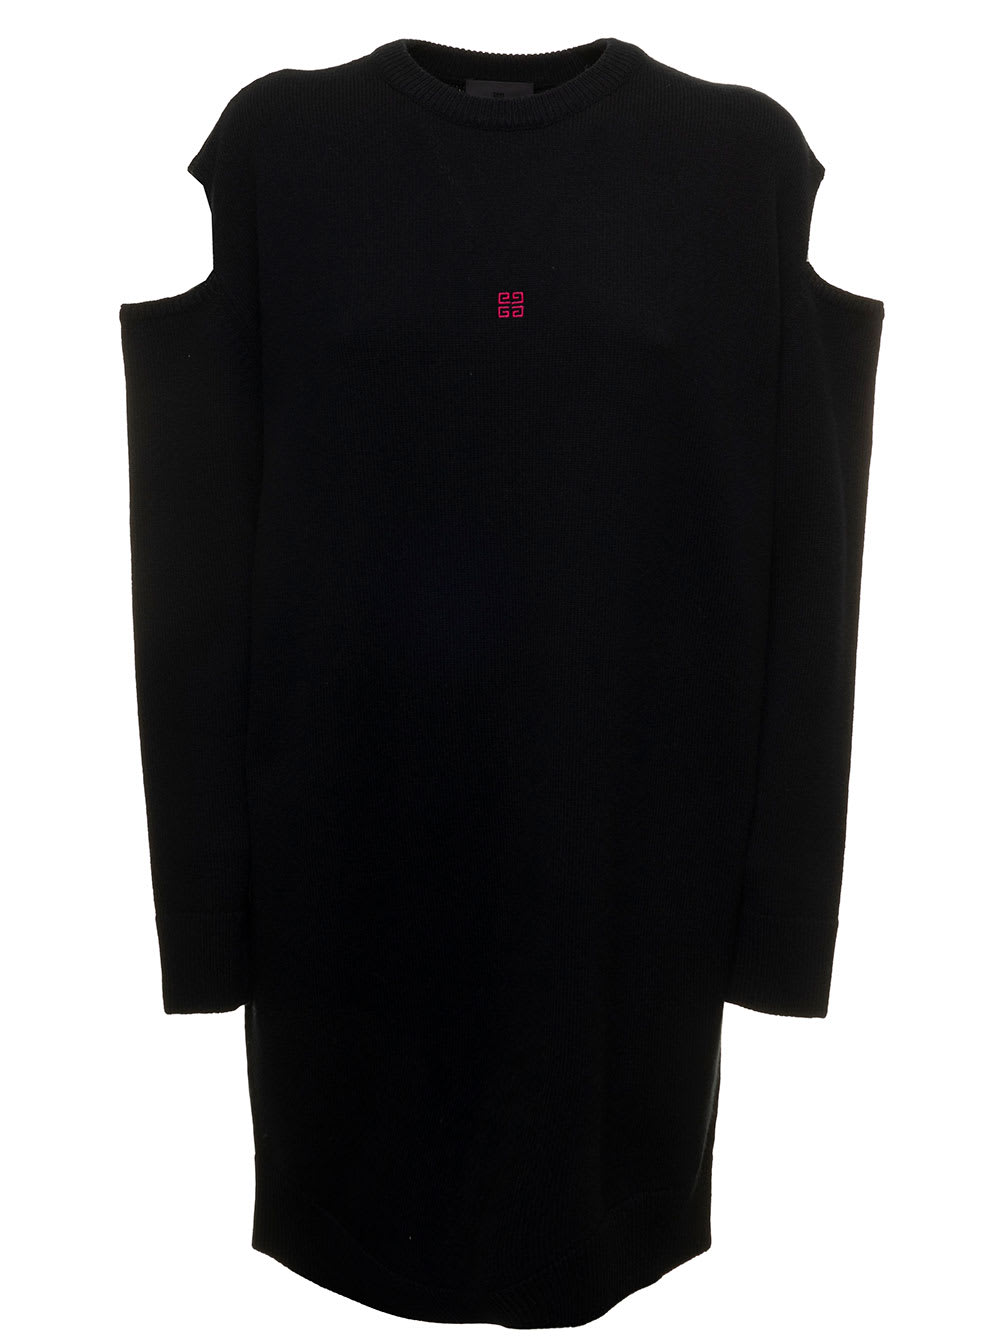 GIVENCHY OVERSIZE BLACK WOOL AND CASHMERE DRESS WITH LOGO GIVENCHY WOMAN